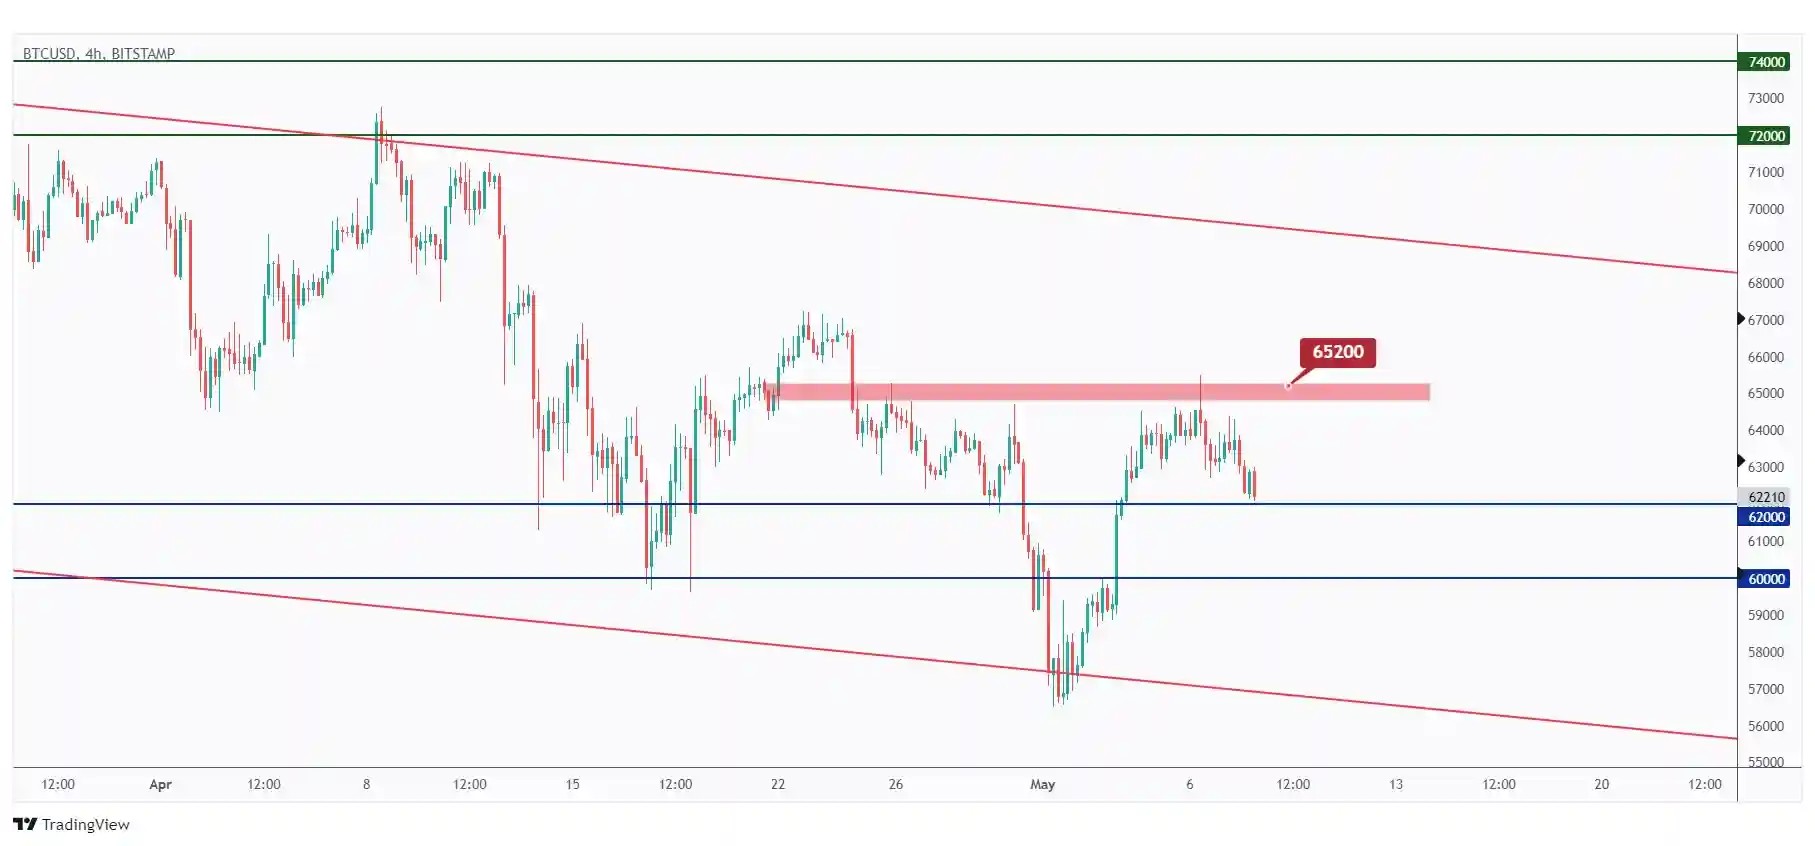 BTC 4h chart showing the last major high at $65,200 that we need a break above for the bulls to take over.